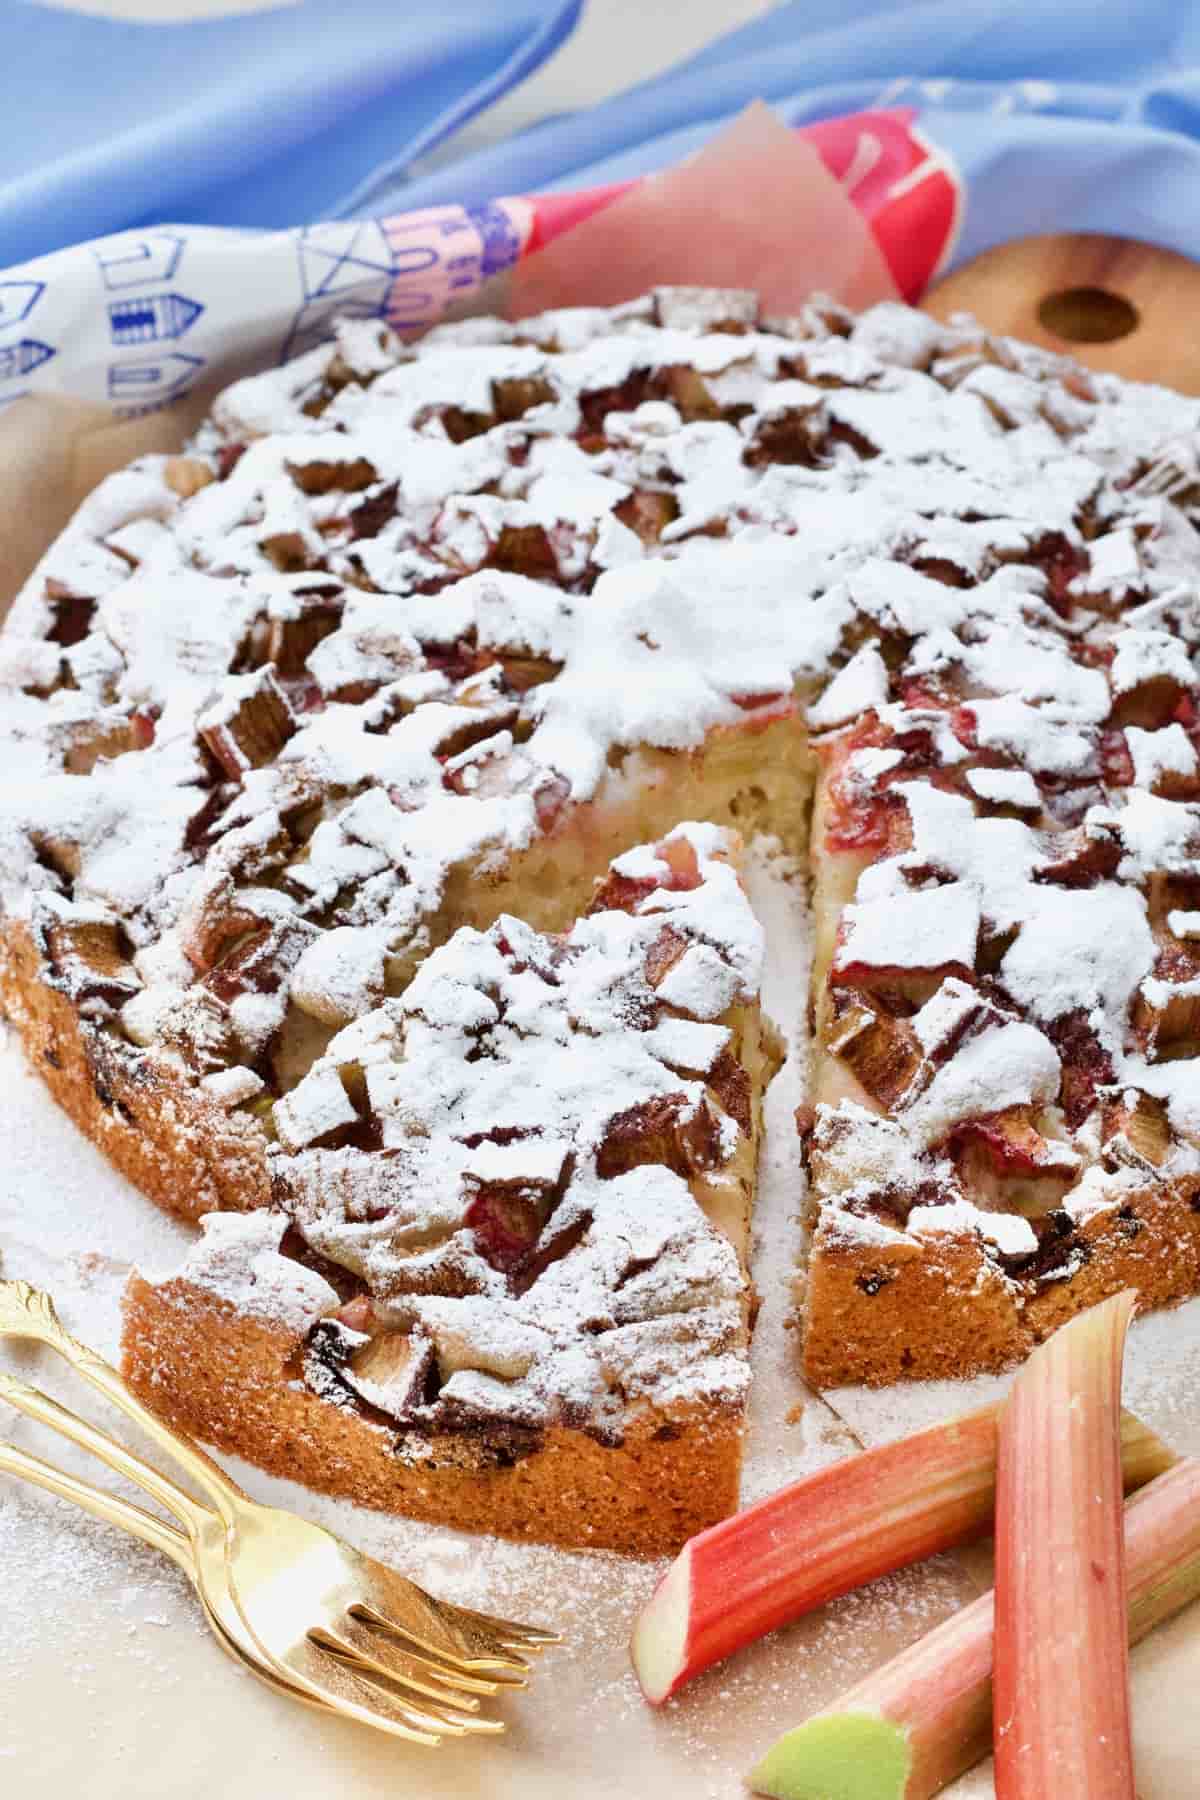 Easy rhubarb cake with a slice cut, dessert forks and pieces of raw rhubarb.